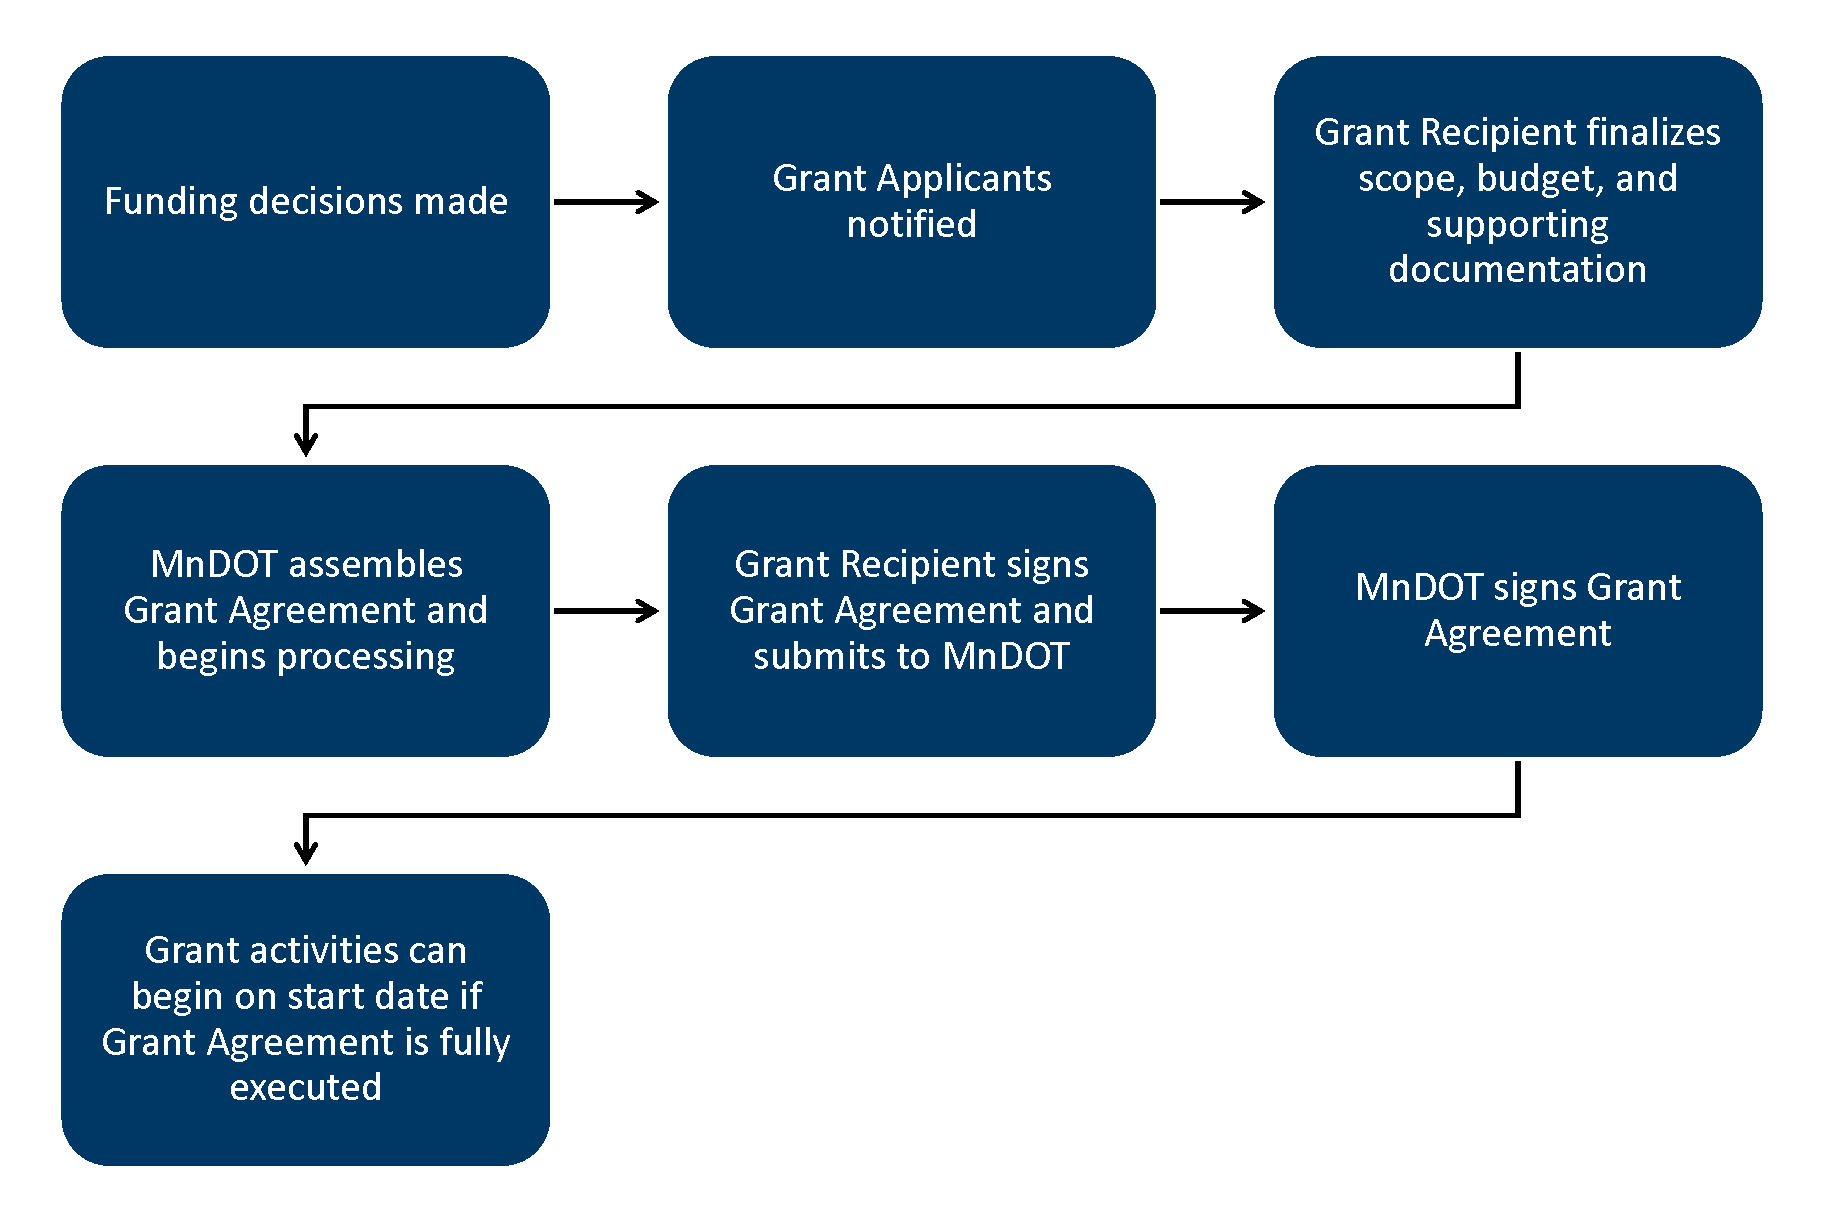 image of the grant process that is described below